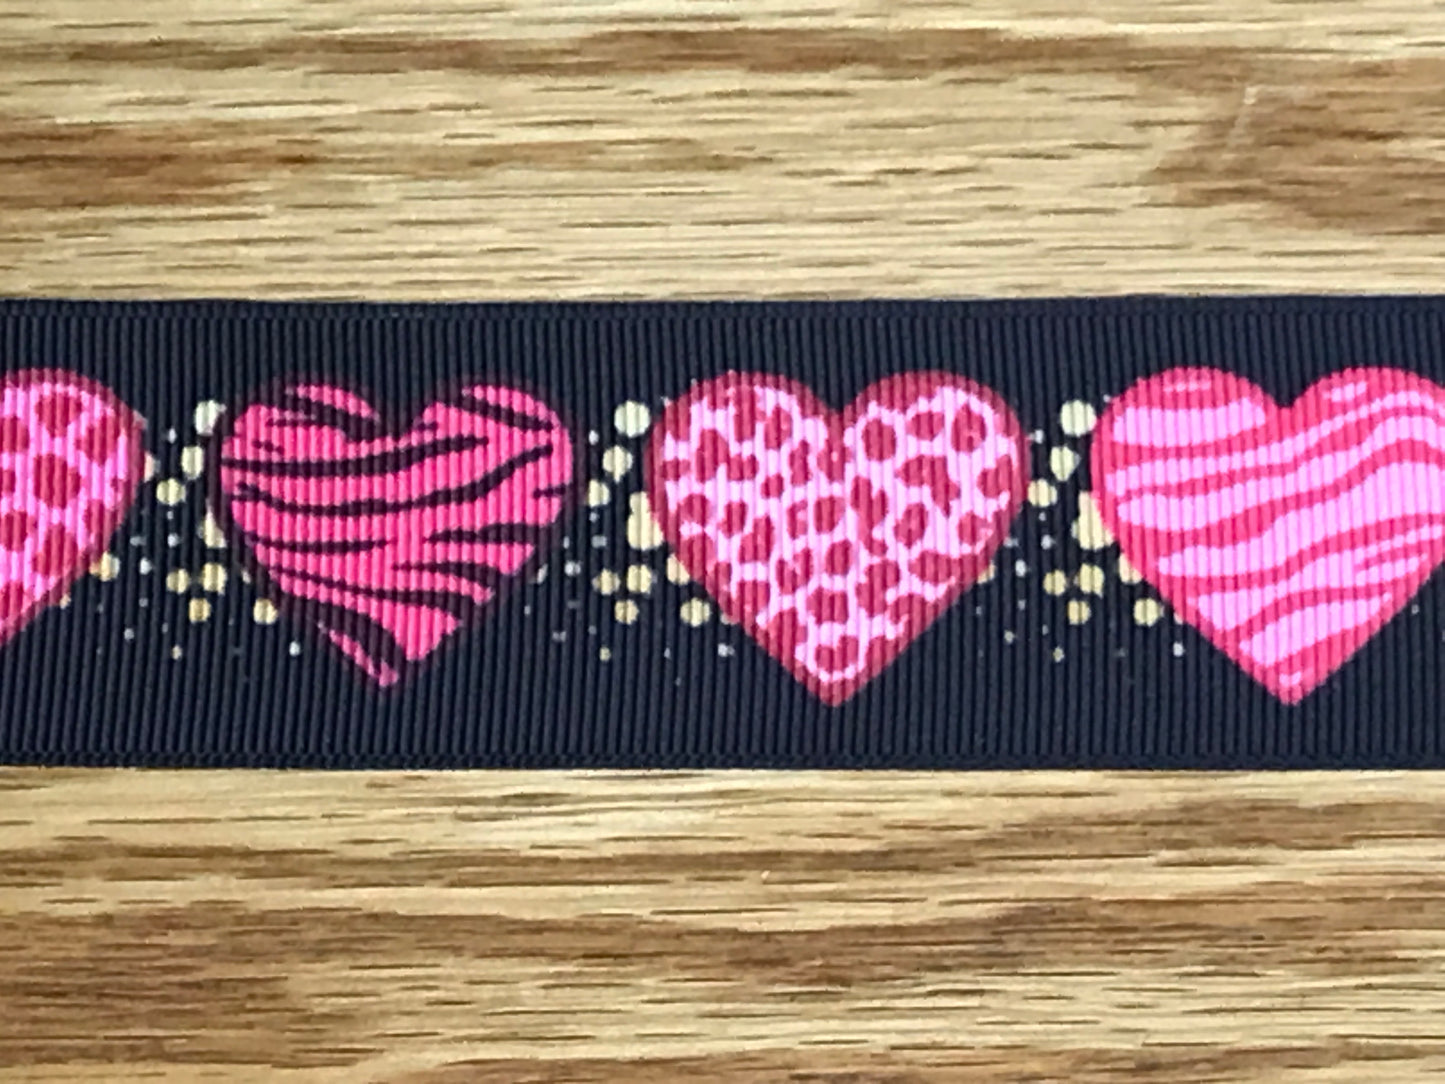 SALE 7/8" Wide Black Grosgrain Ribbon With Animal Print Valentine's Day Hearts In Pink & Red